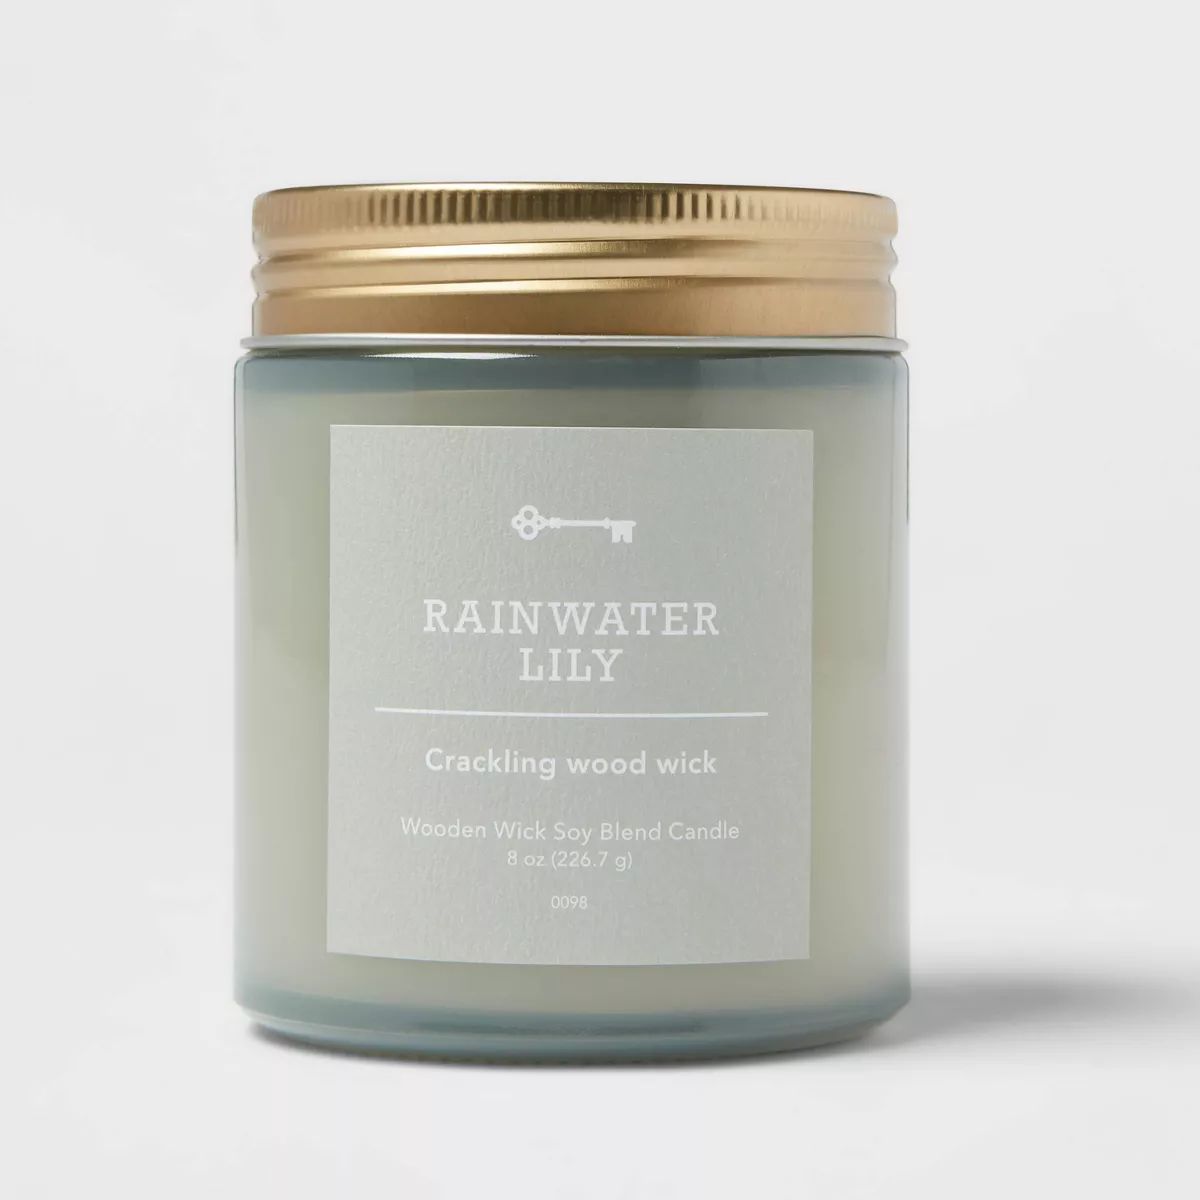 Tinted Glass Rainwater Lily Lidded Jar Candle Blue 8oz - Threshold™ | Target